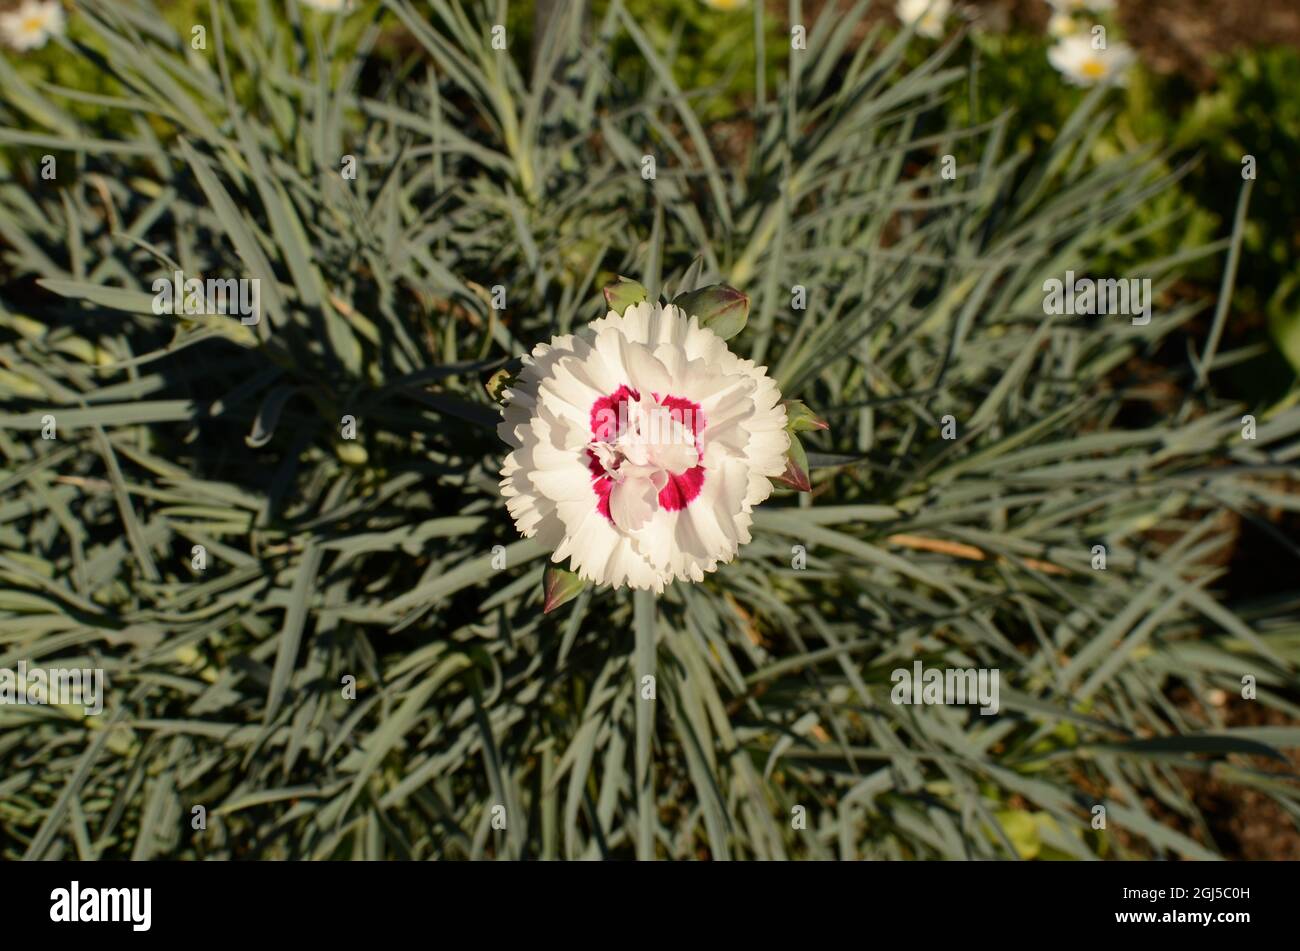 White And Red Dianthus Flower. Stock Photo